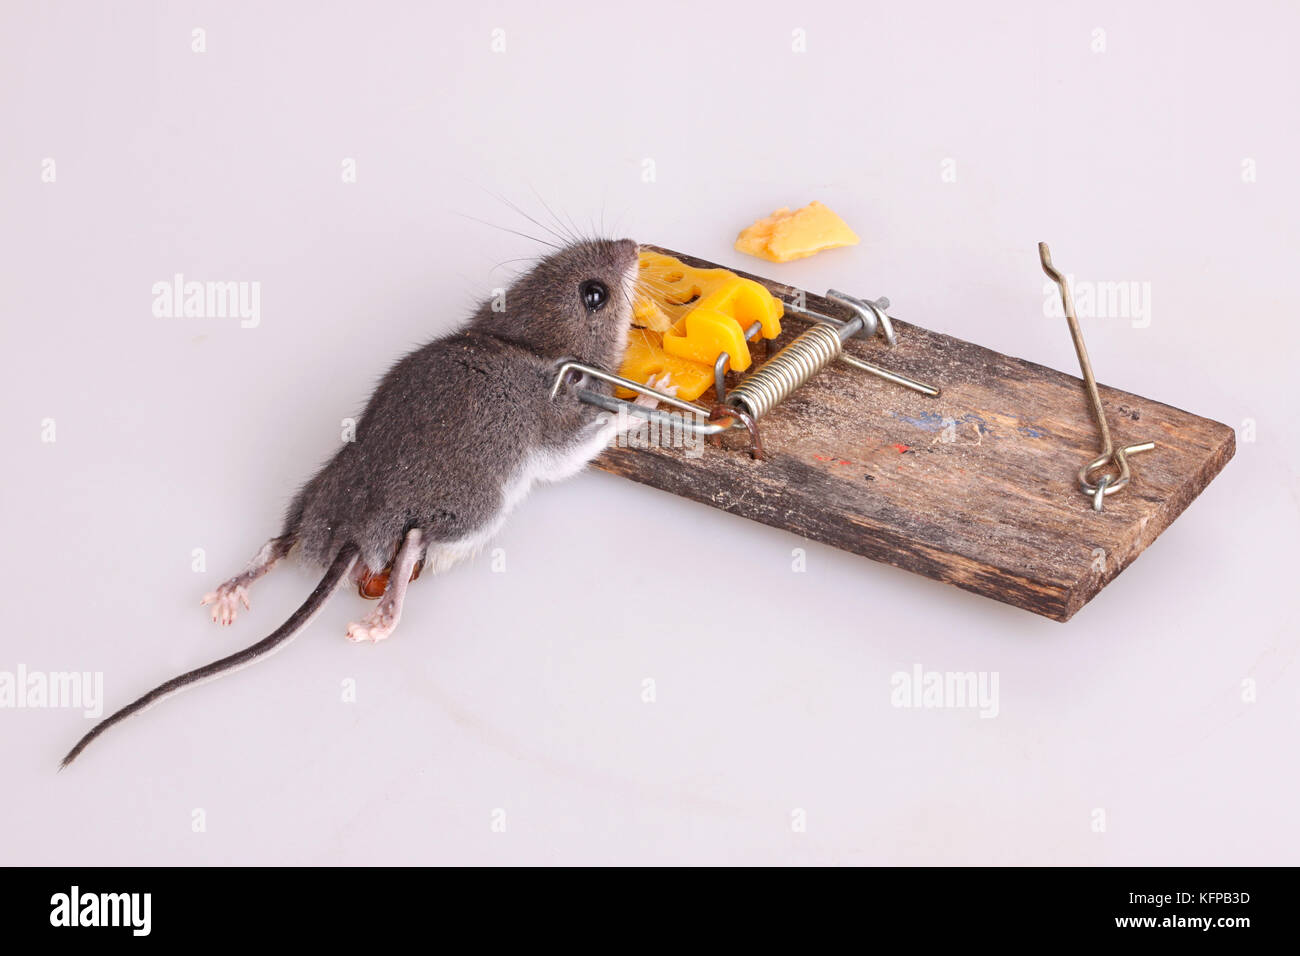 Common house mouse (Mus musculus) killed in a spring-loaded bar snap trap on a white background Stock Photo